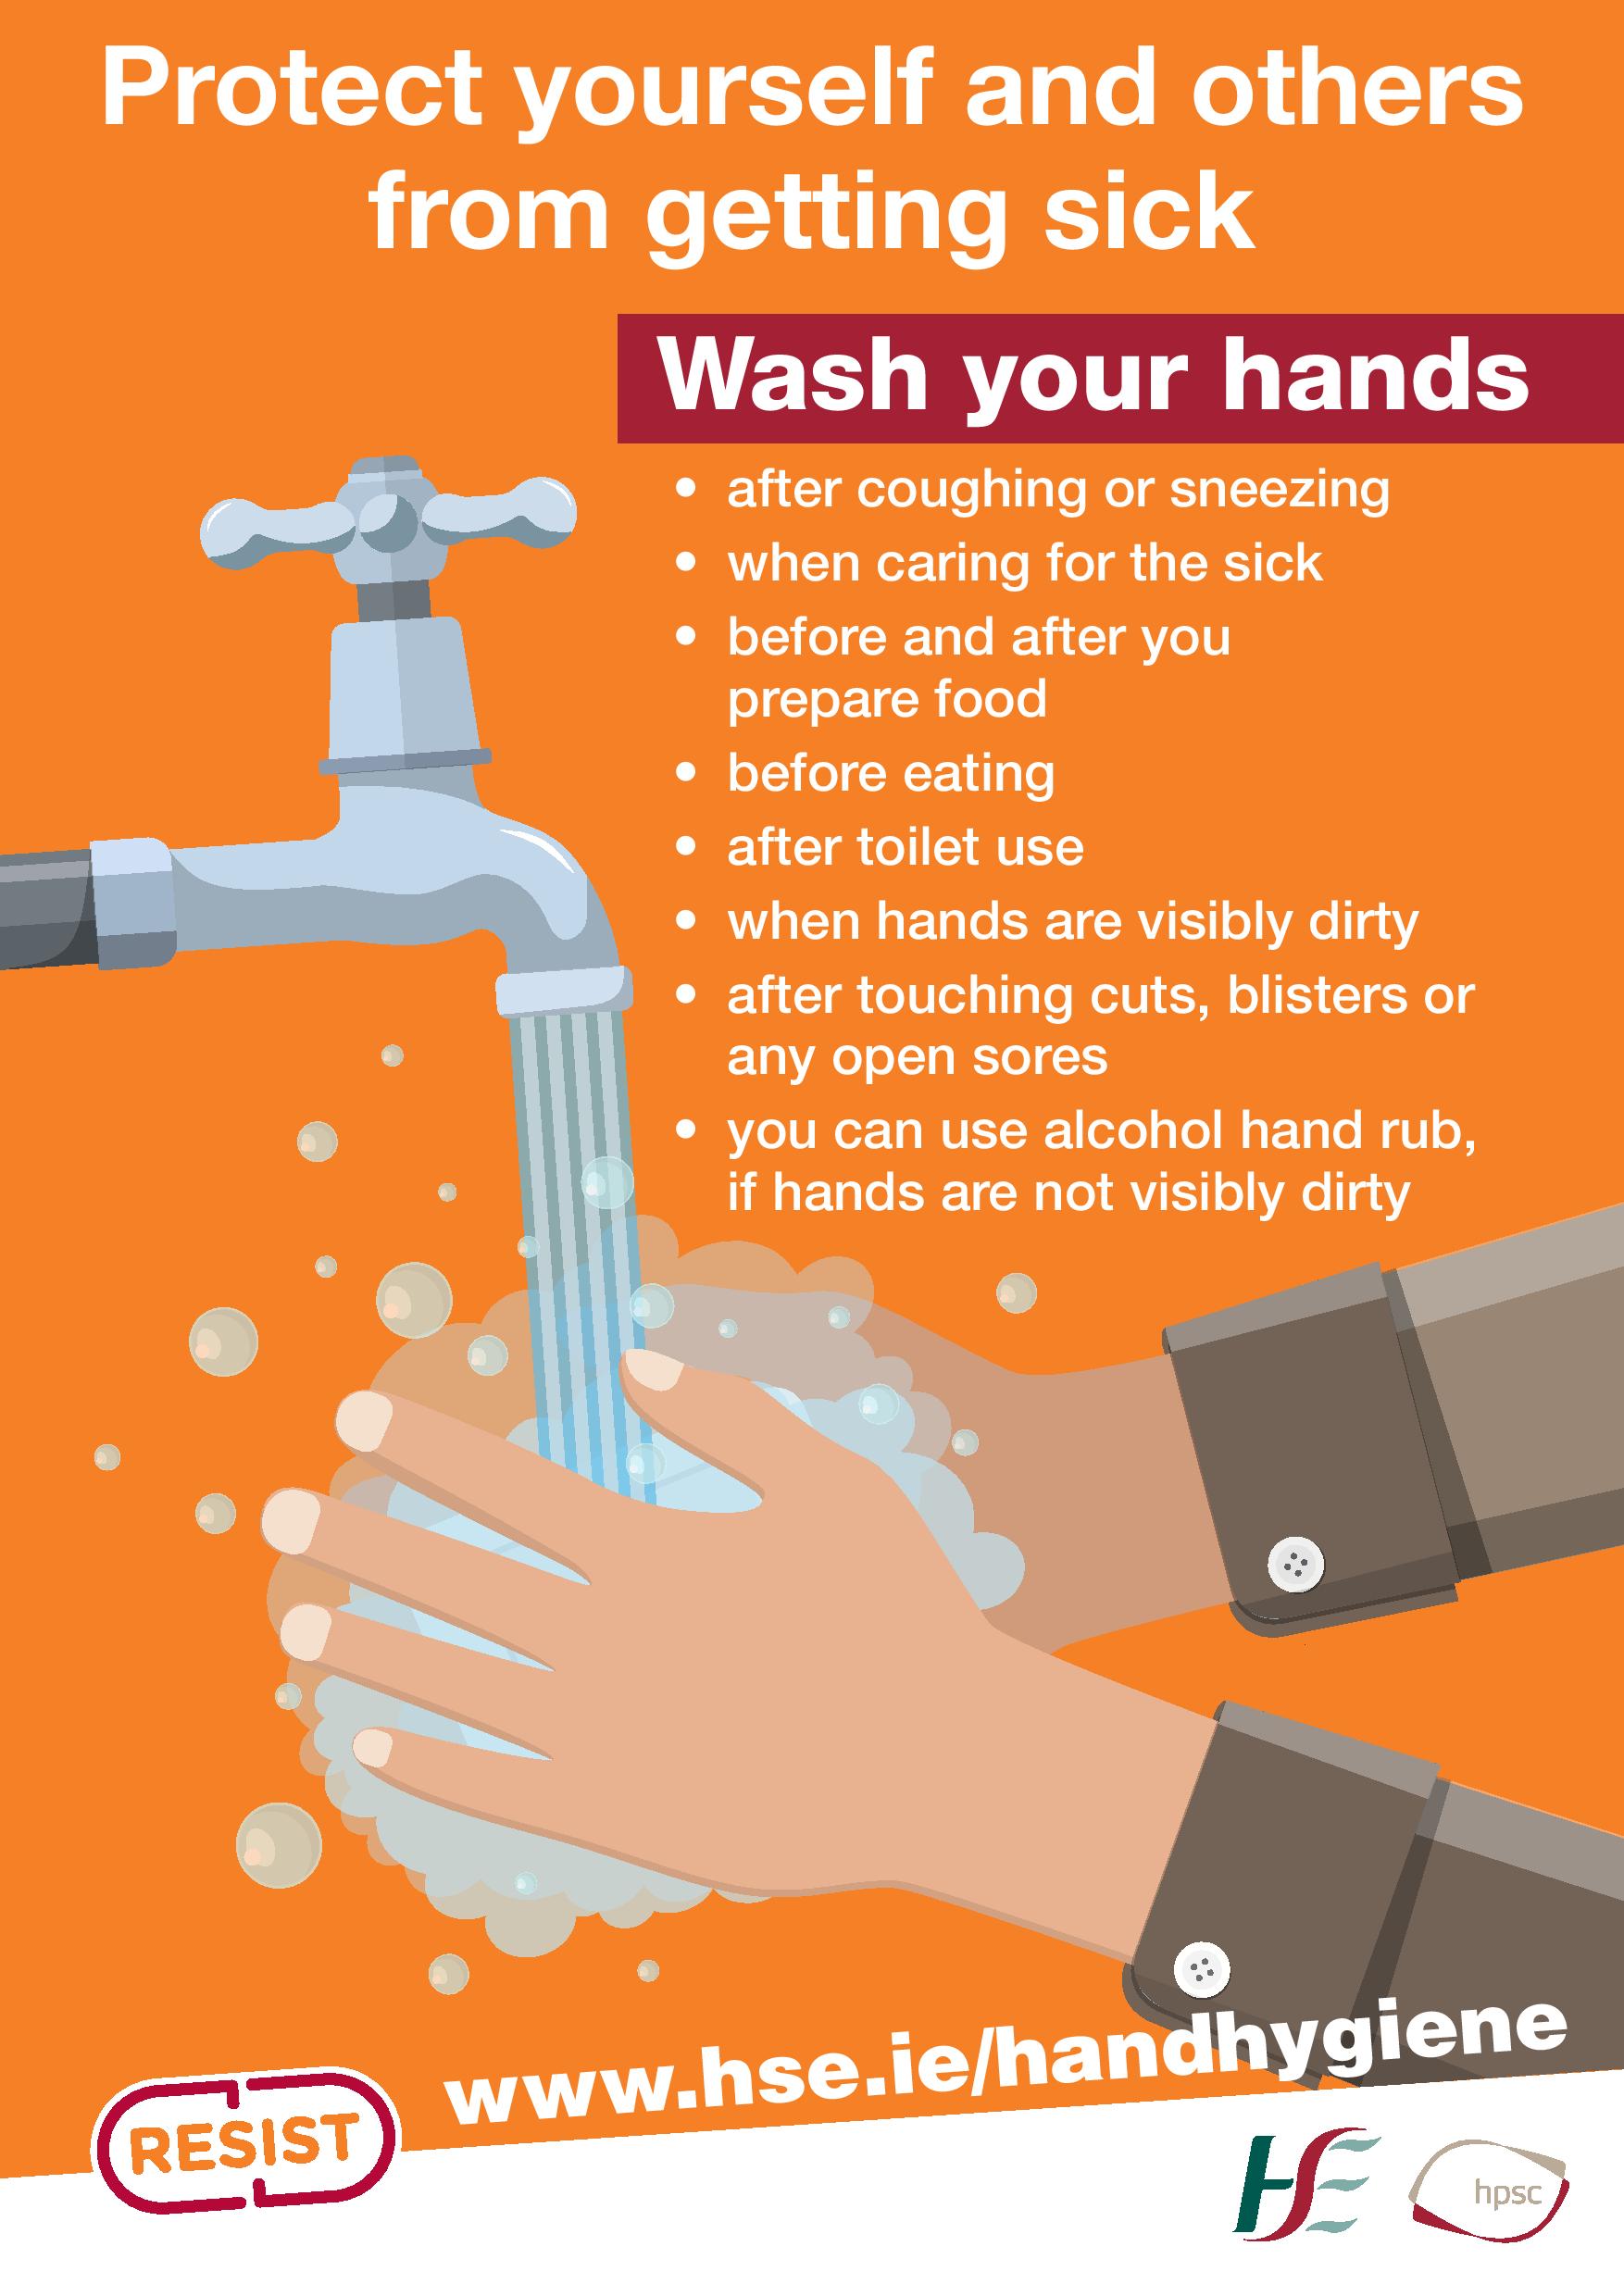 covid-19-hygiene-2020-wash-your-hands-nenagh-ie